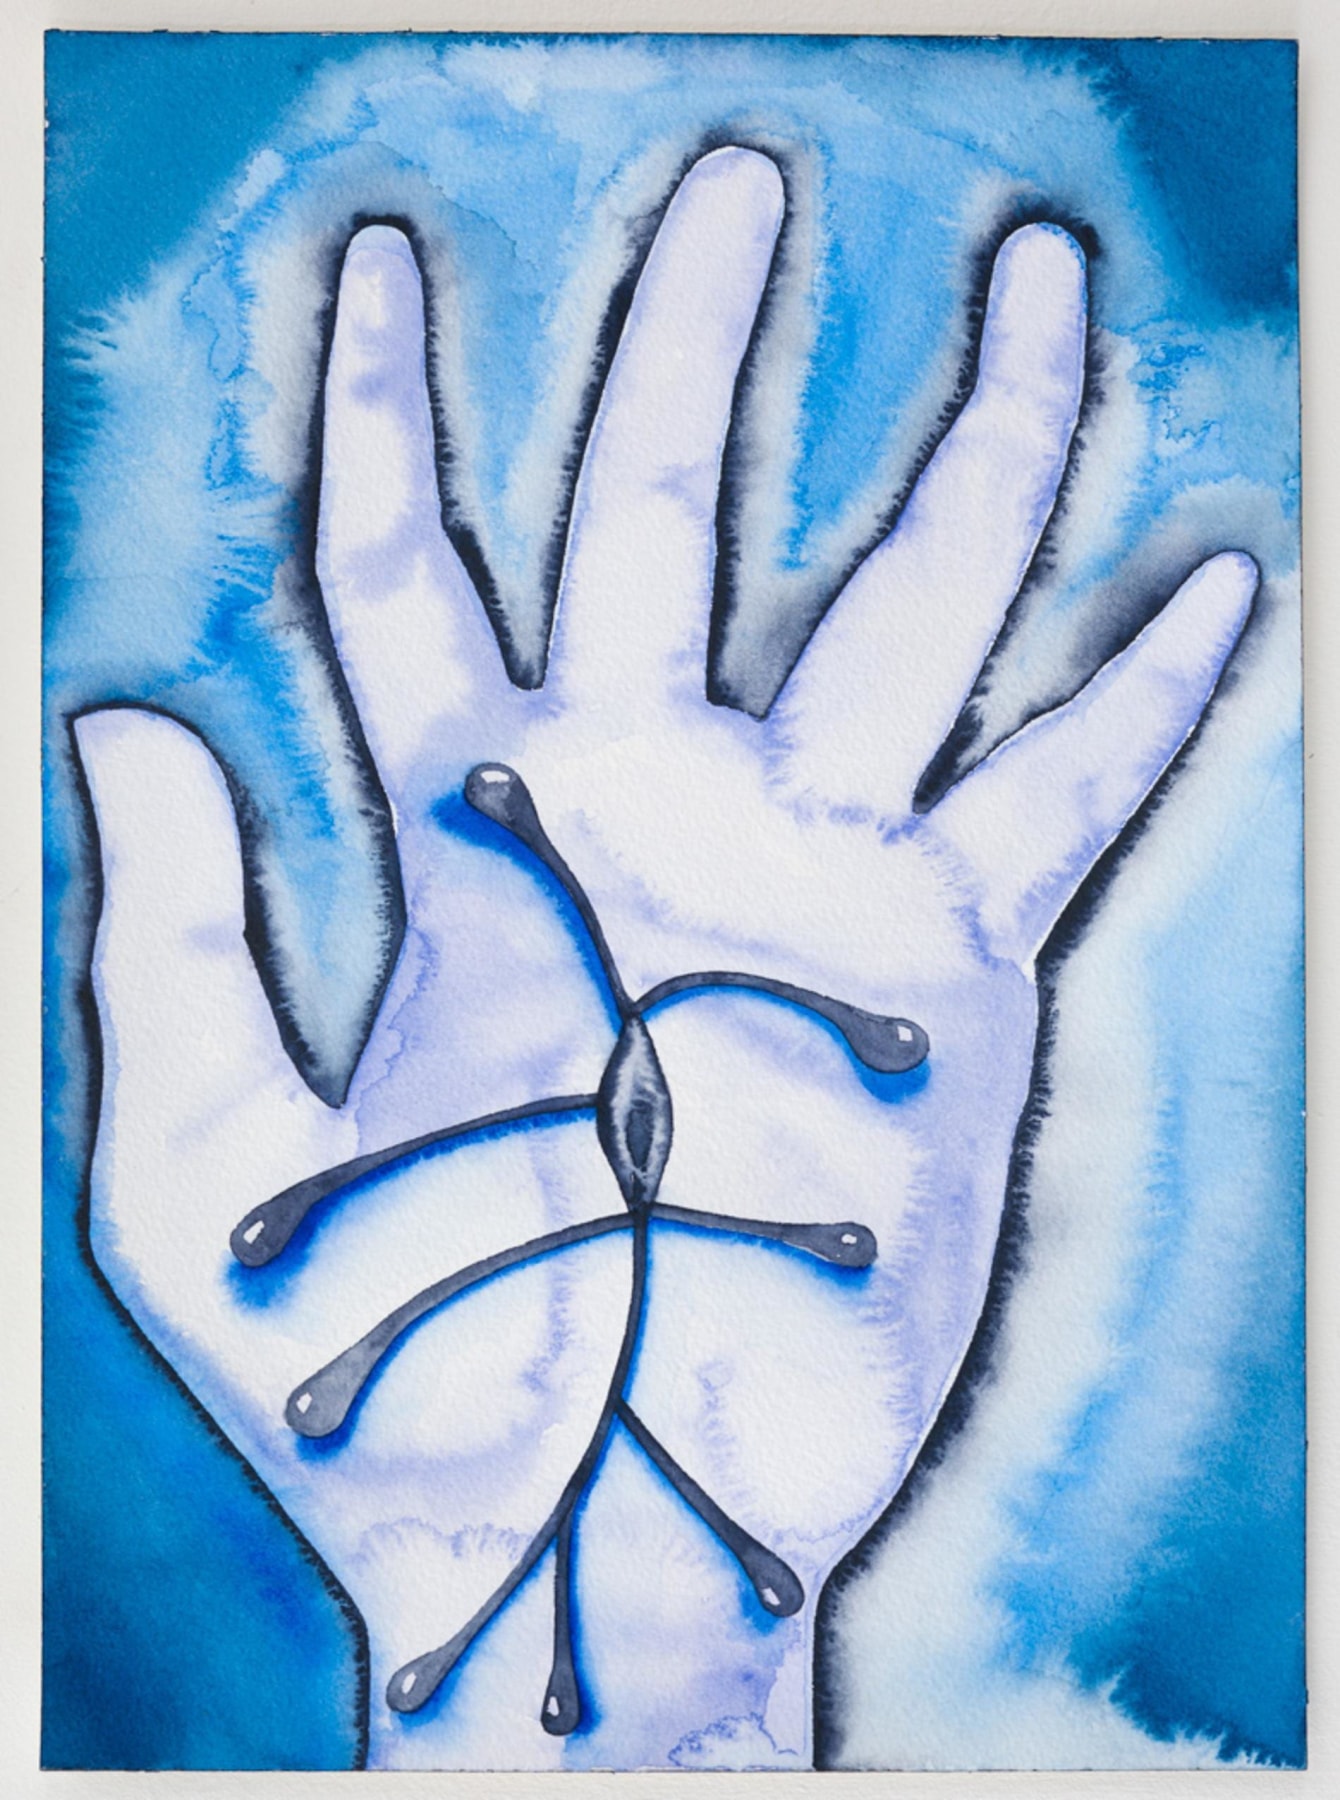 Image of FRANCESCO CLEMENTE's Blue and Blue, 2012